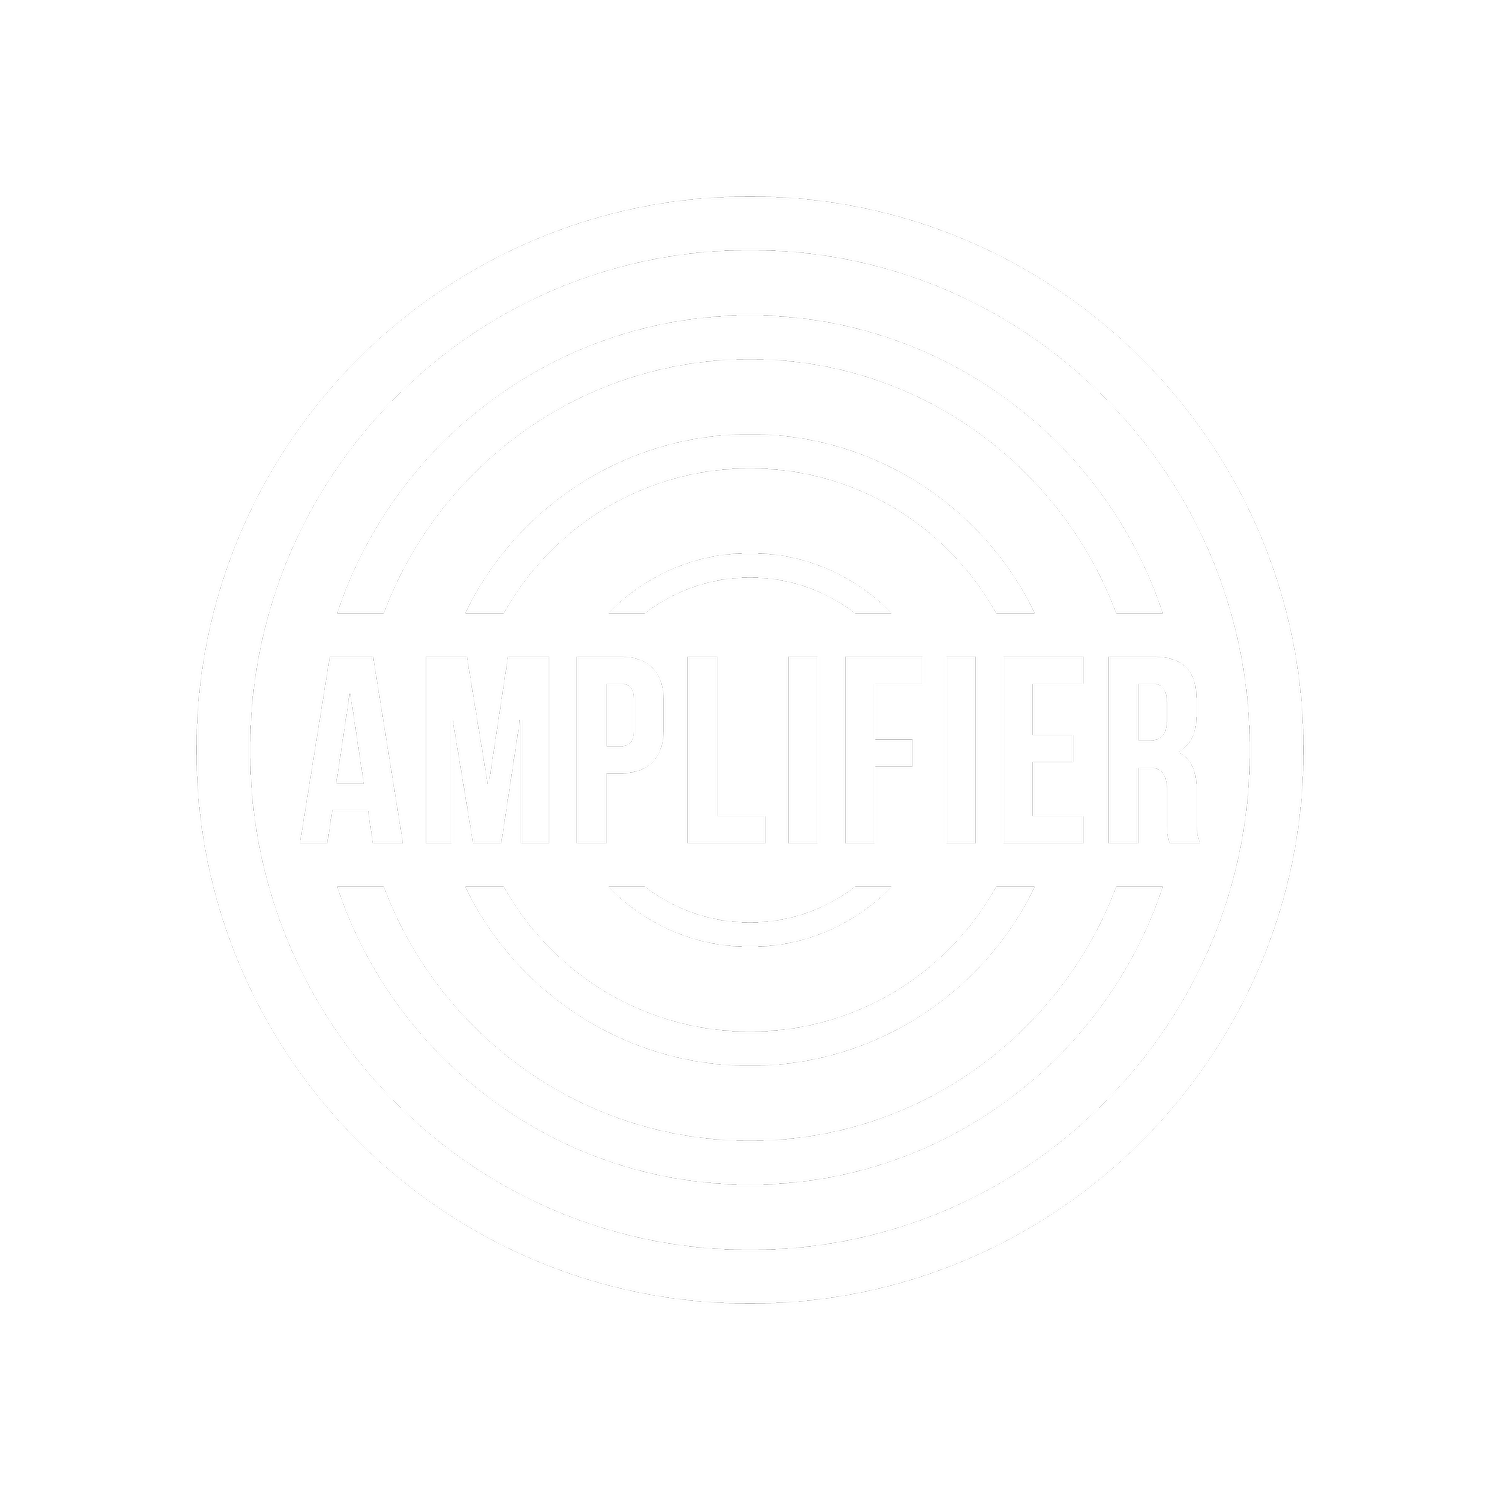 We Are The Amplifiers